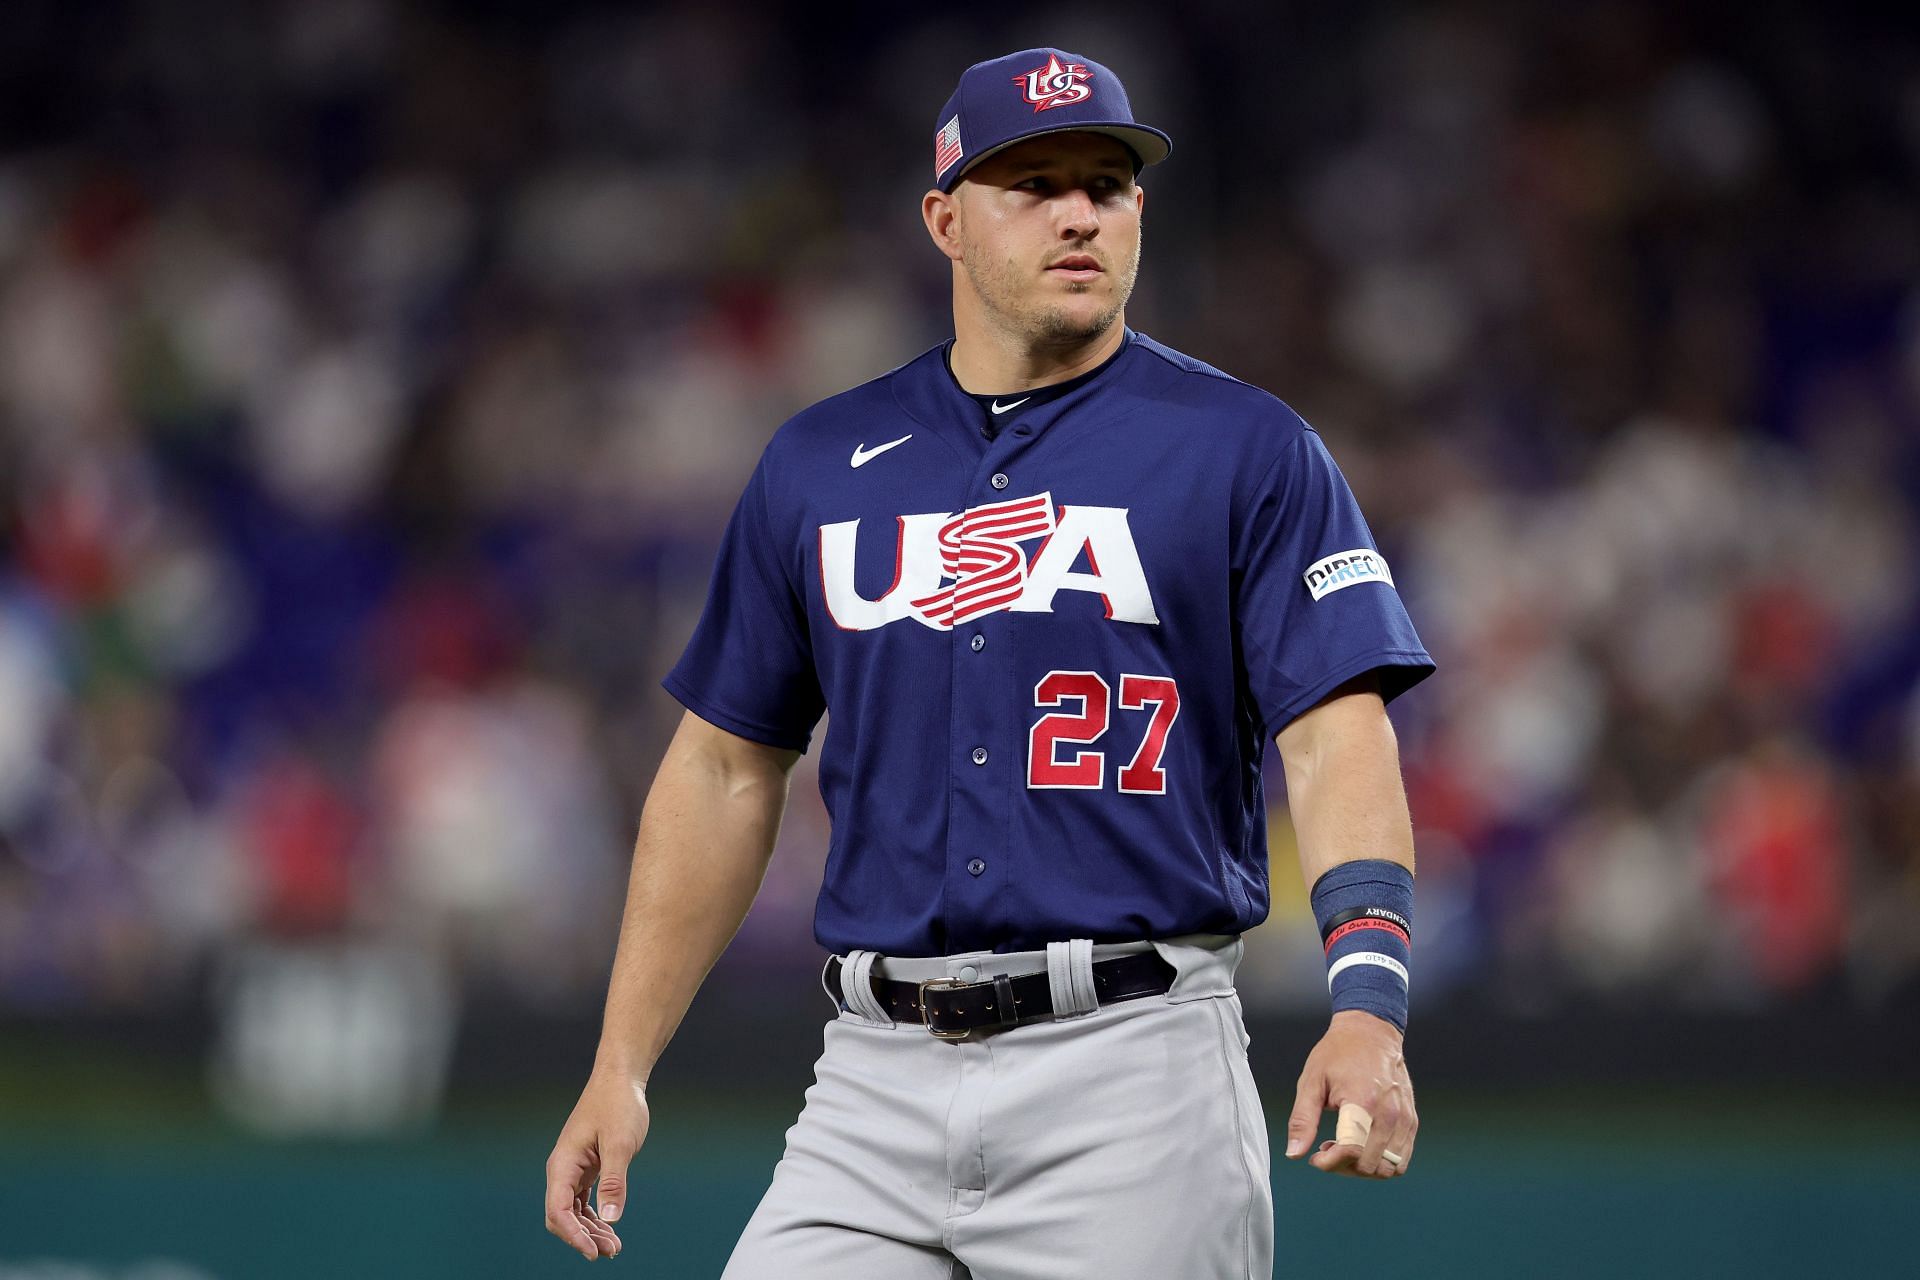 World Baseball Classic: Angels superstar Mike Trout confirms plans to play  for Team USA in 2026 tournament 